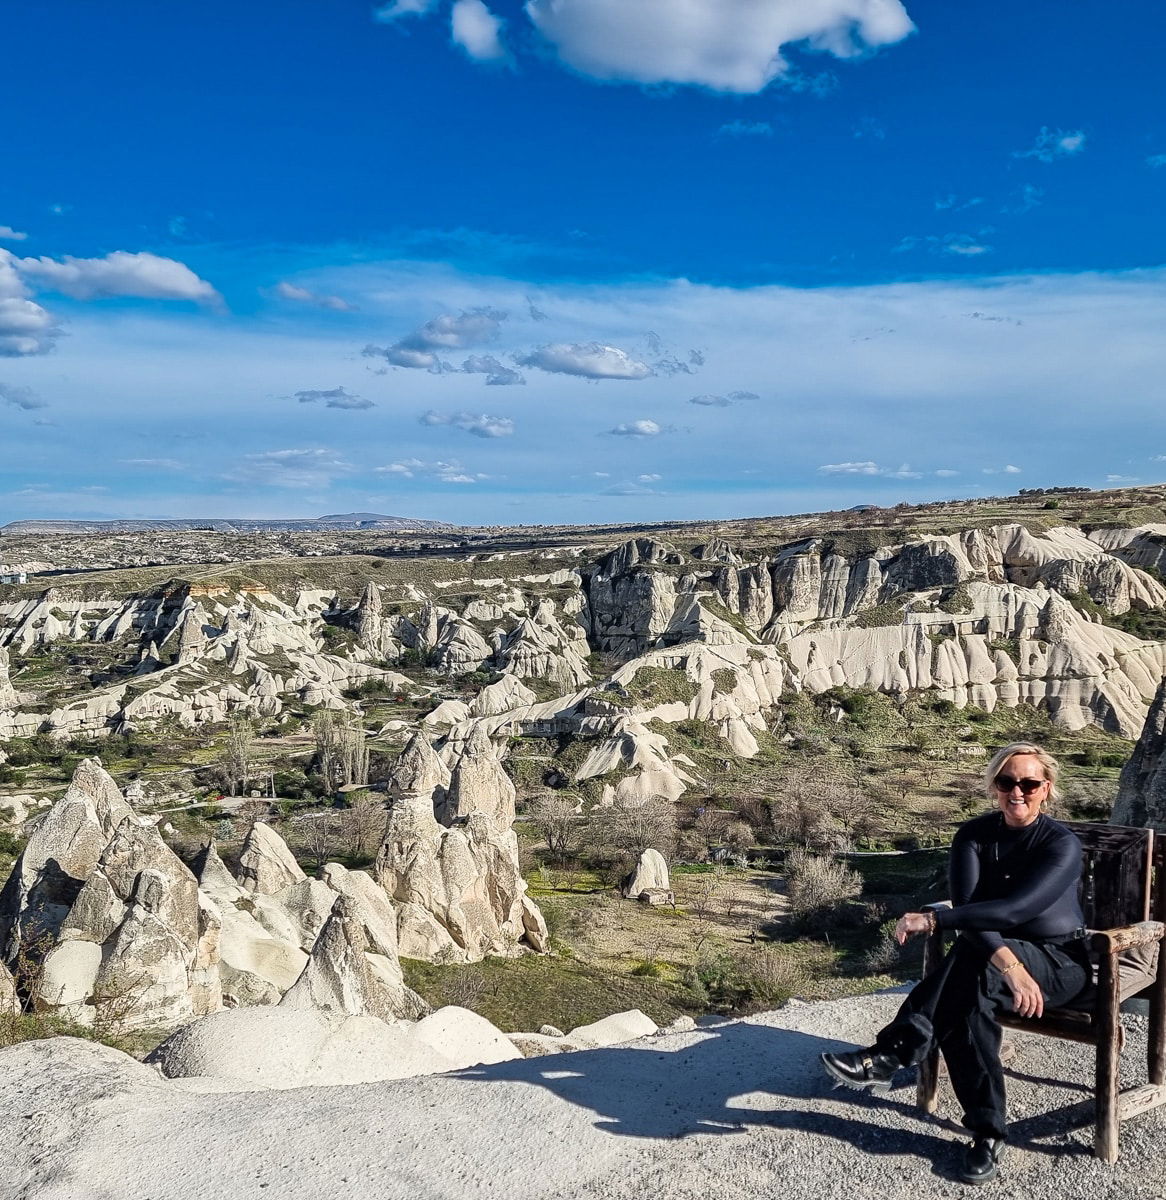 A woman sitting on a wooden chair, smiling at the camera, with the rocky landscape of Goreme, Cappadocia, in the background.